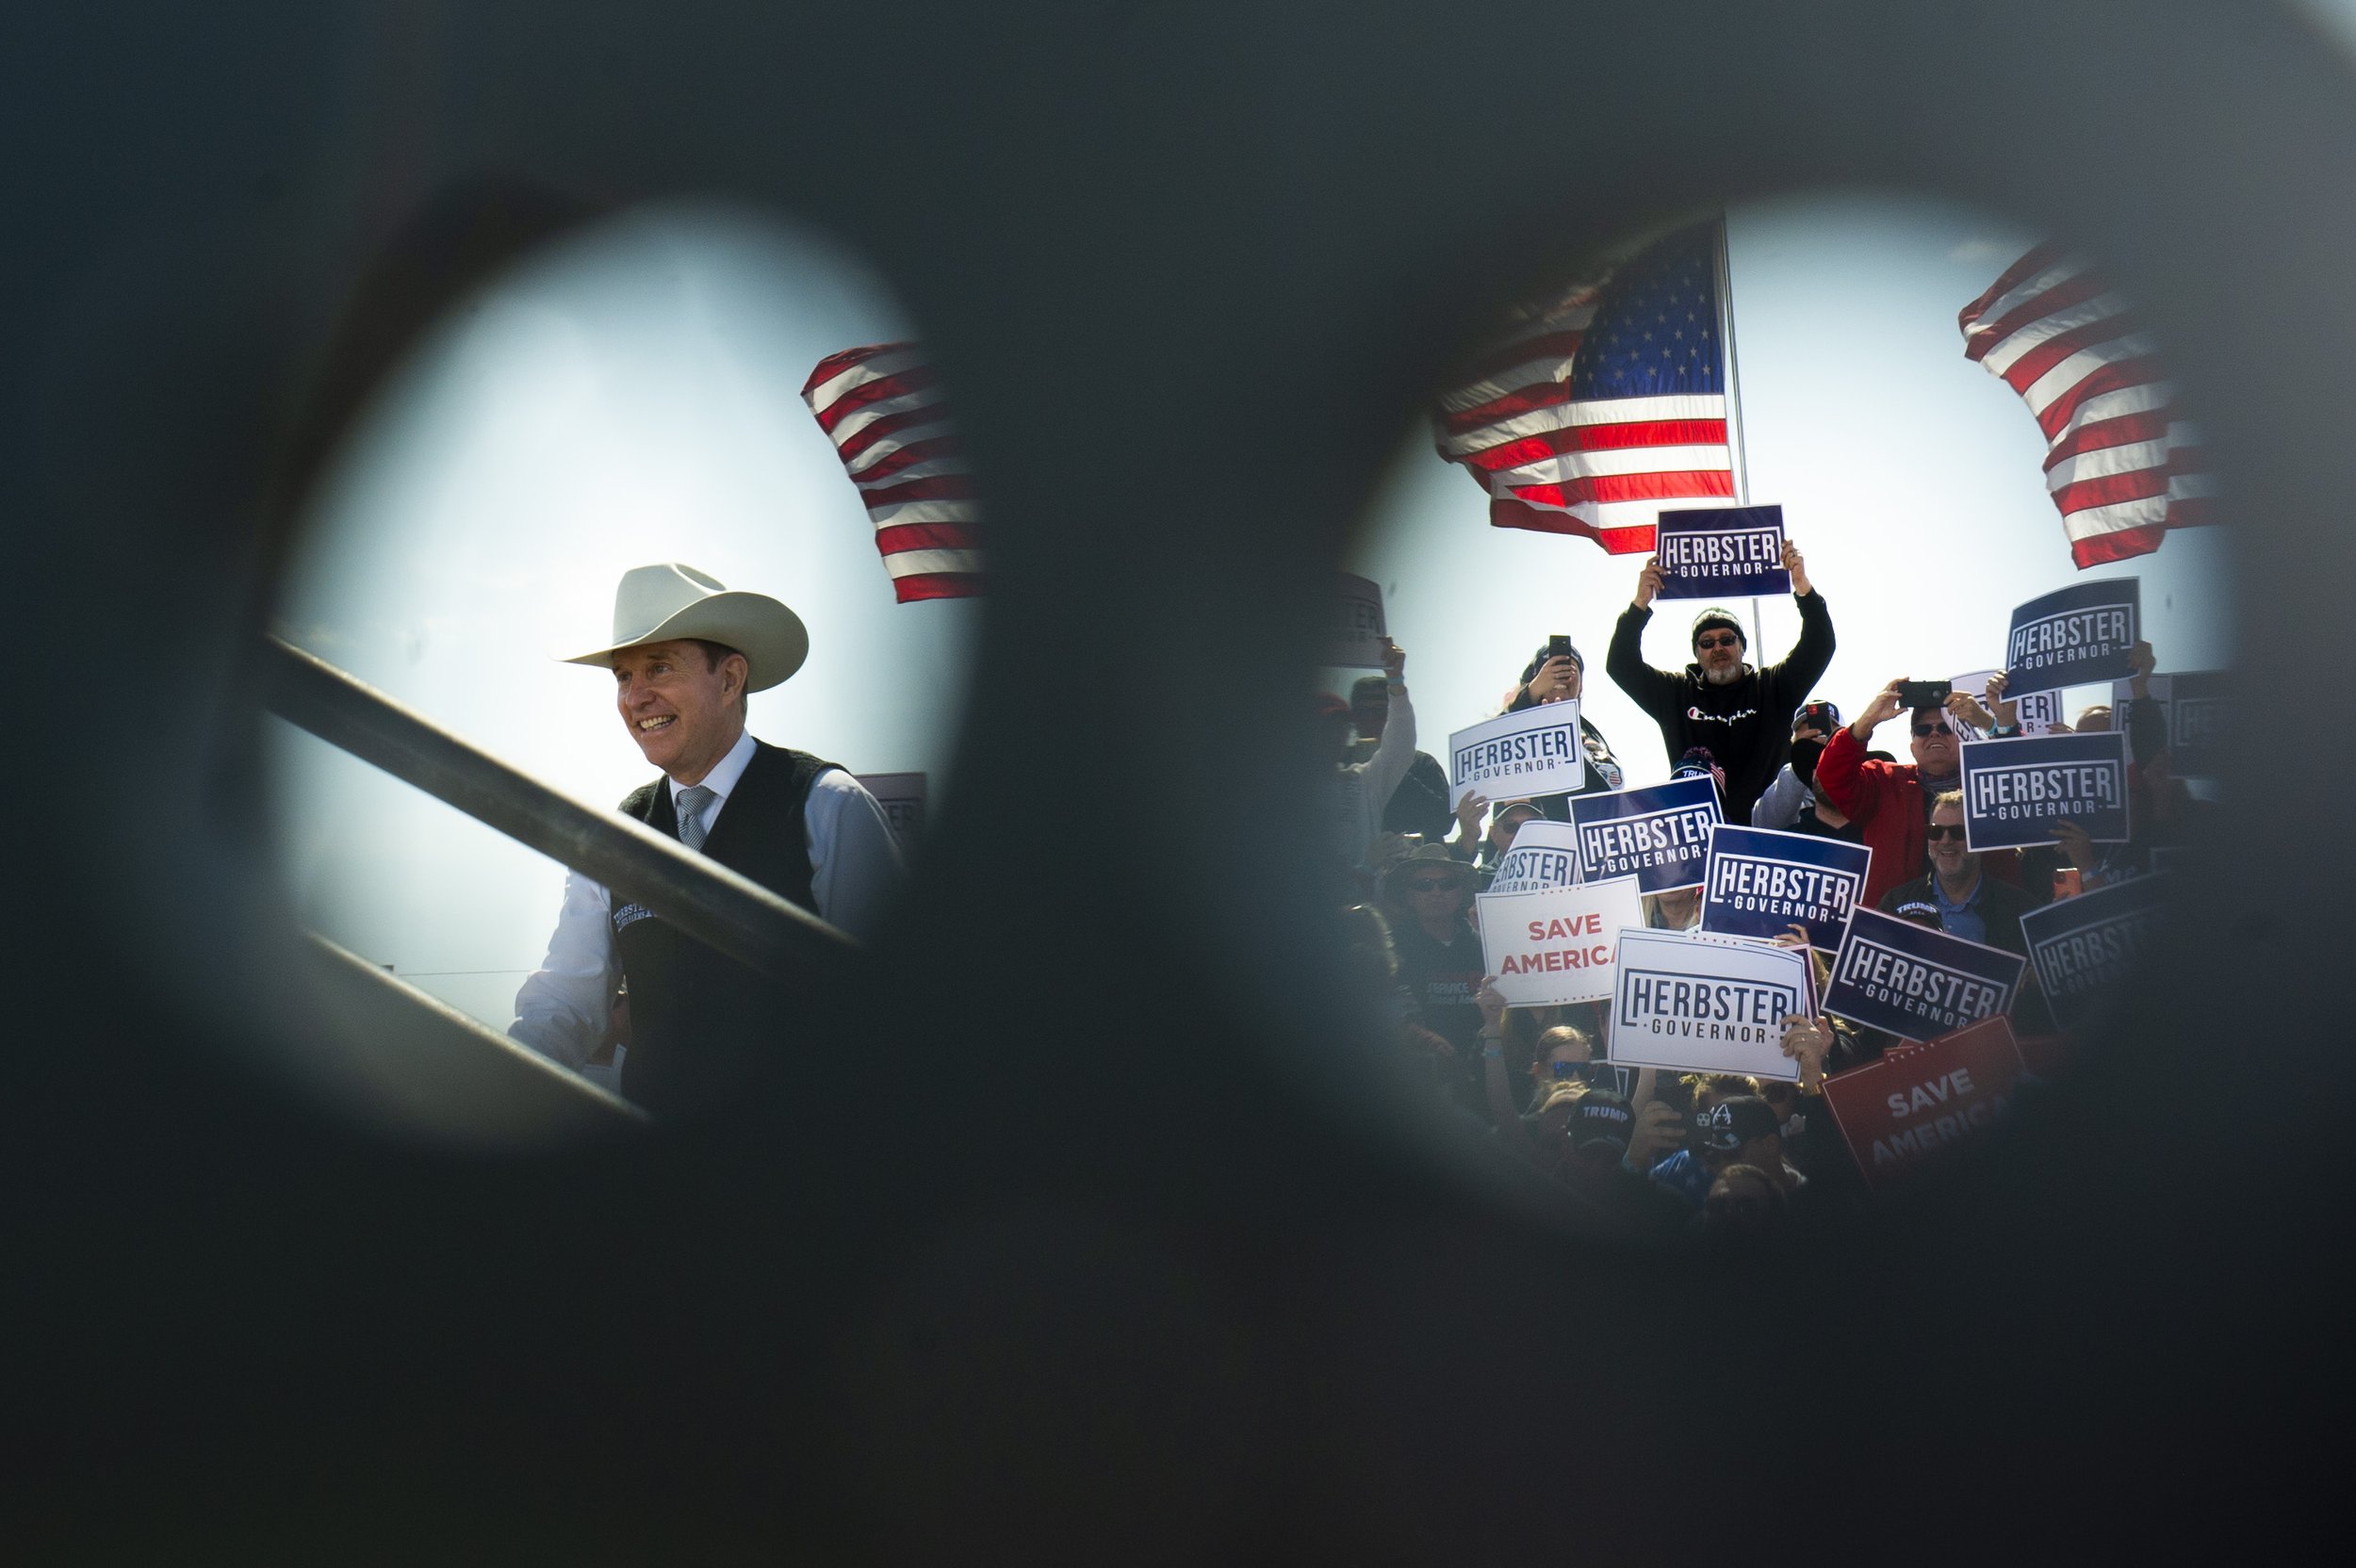  As seen through open cable holders, avid supporters of Gubernatorial candidate Charles Herbster and former president Donald Trump, cheer as Herbster (left) takes the stage during a Trump rally for him at the I-80 Speedway on May 1, 2022, in Greenwoo